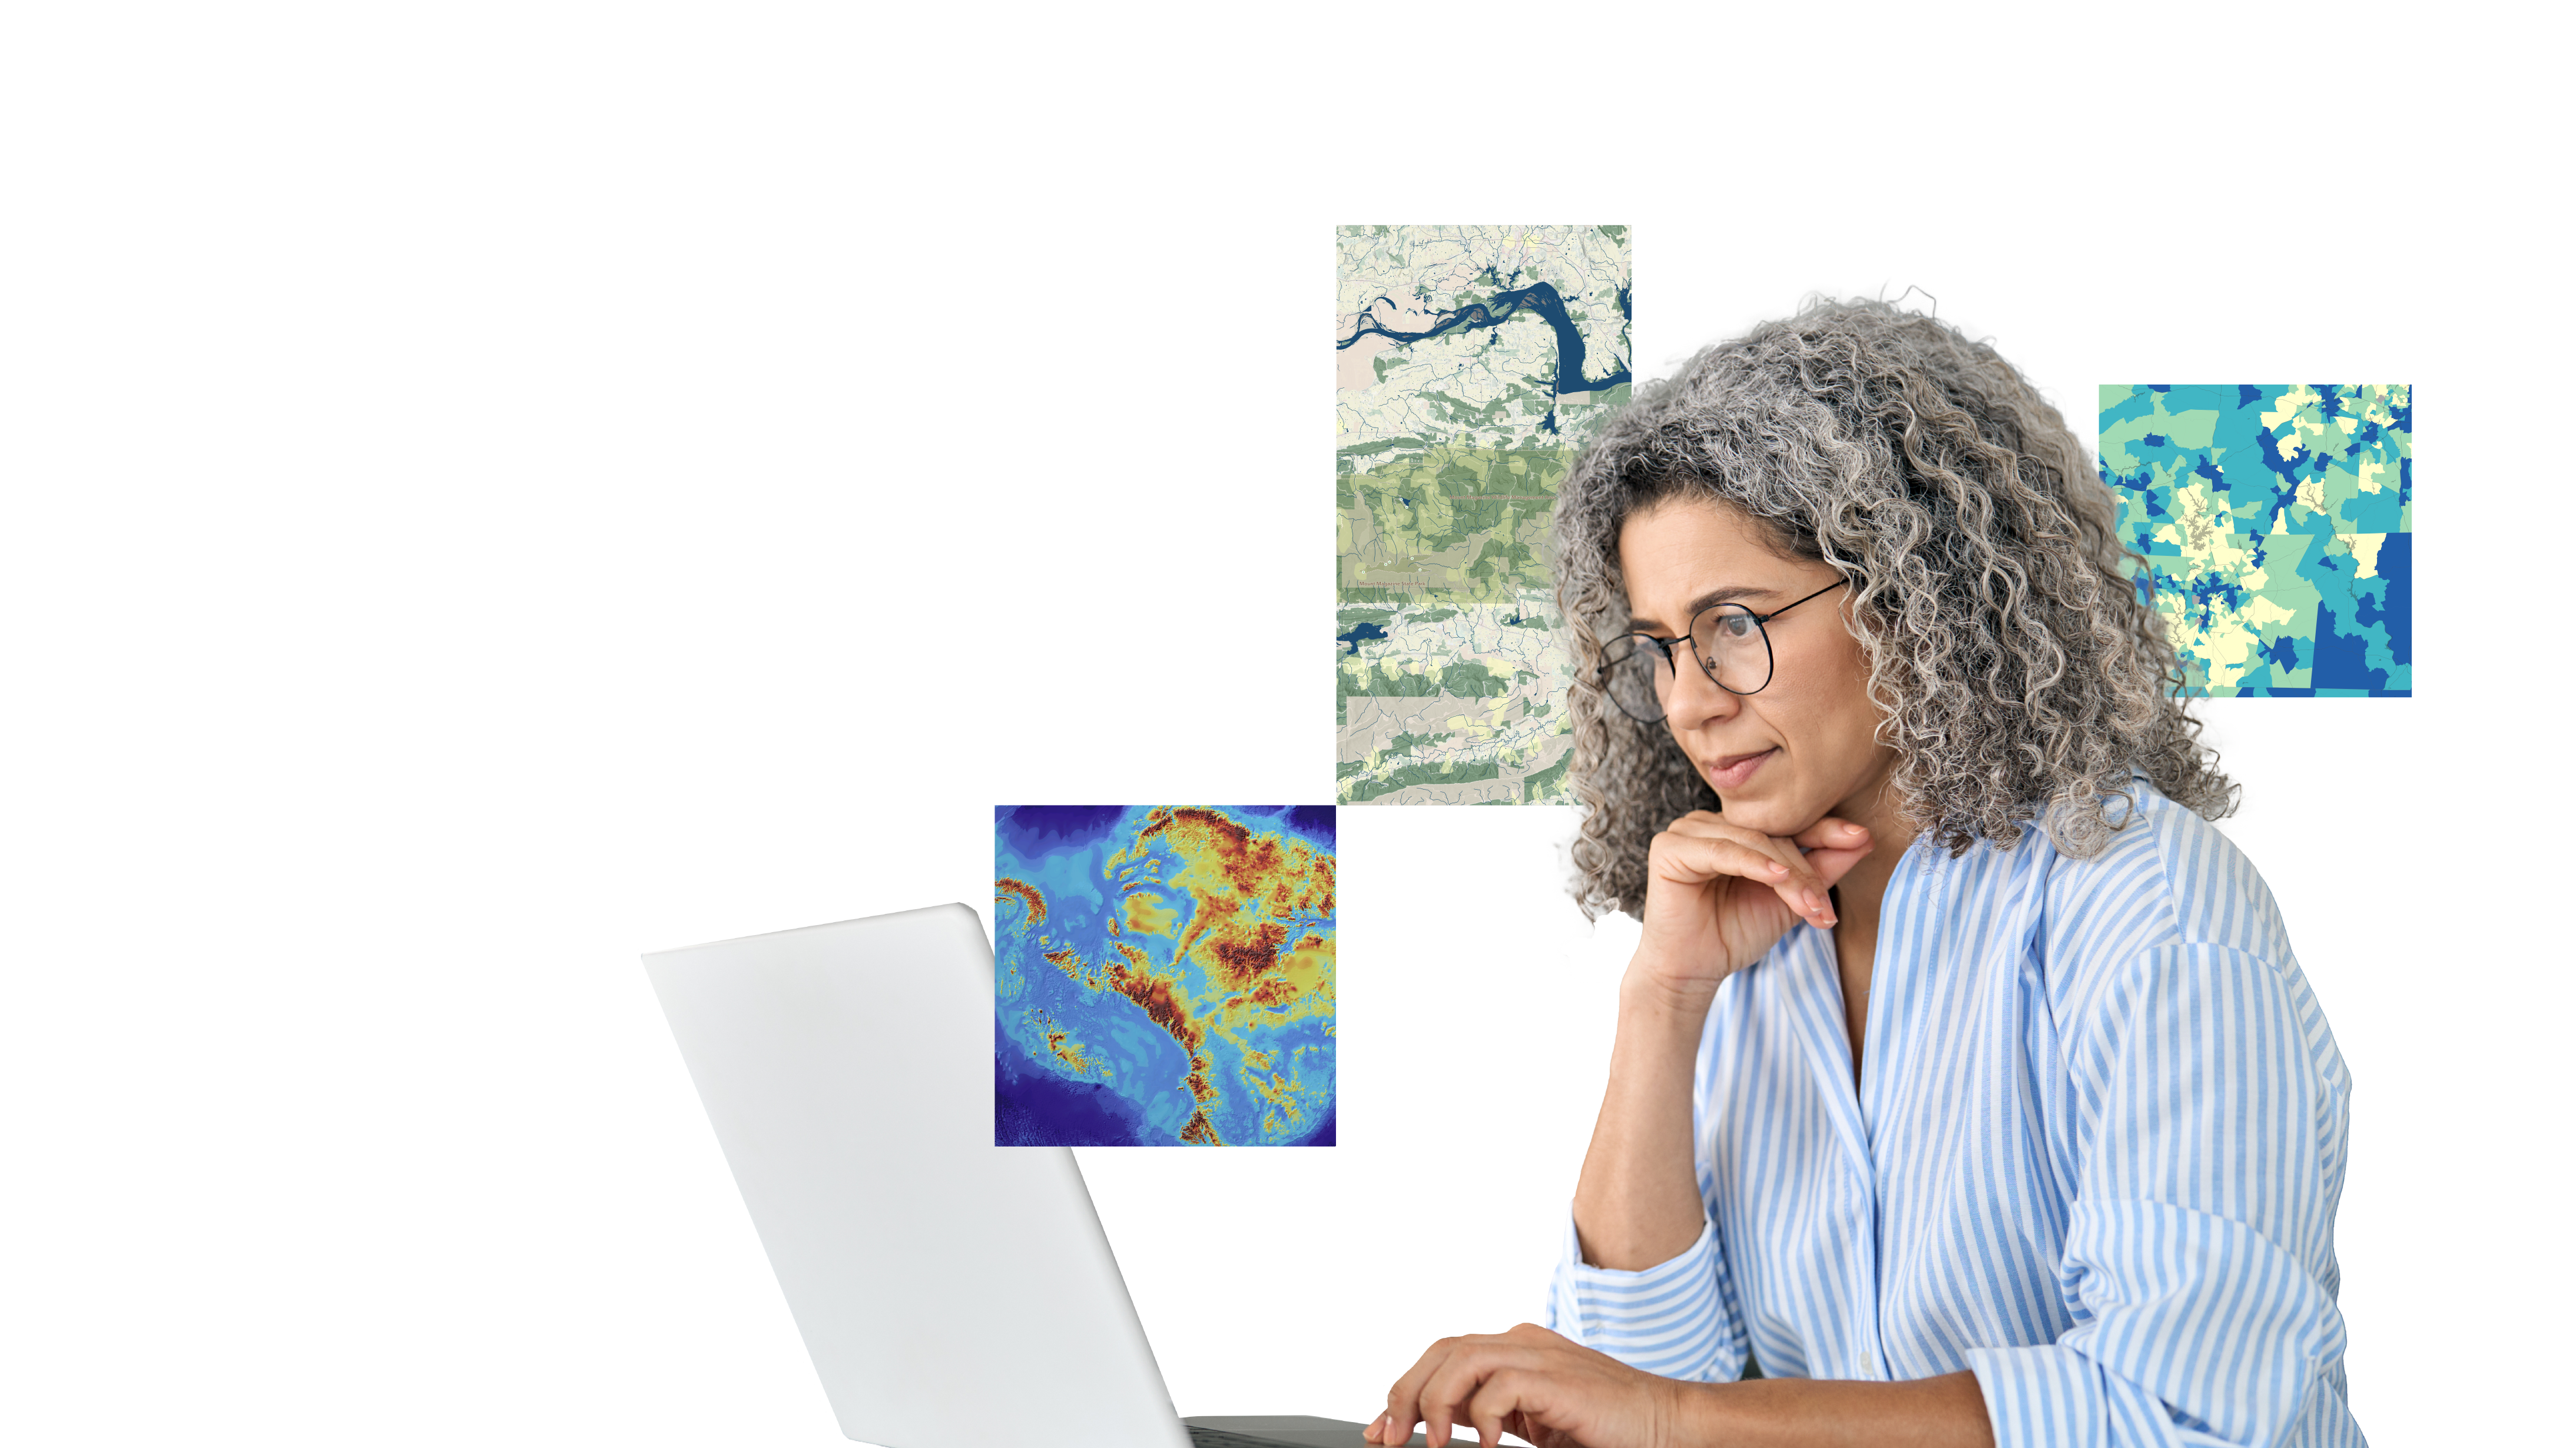 A person wearing glasses and a blue striped collared shirt looking thoughtfully at a laptop display, overlaid with three small colorful projecting maps